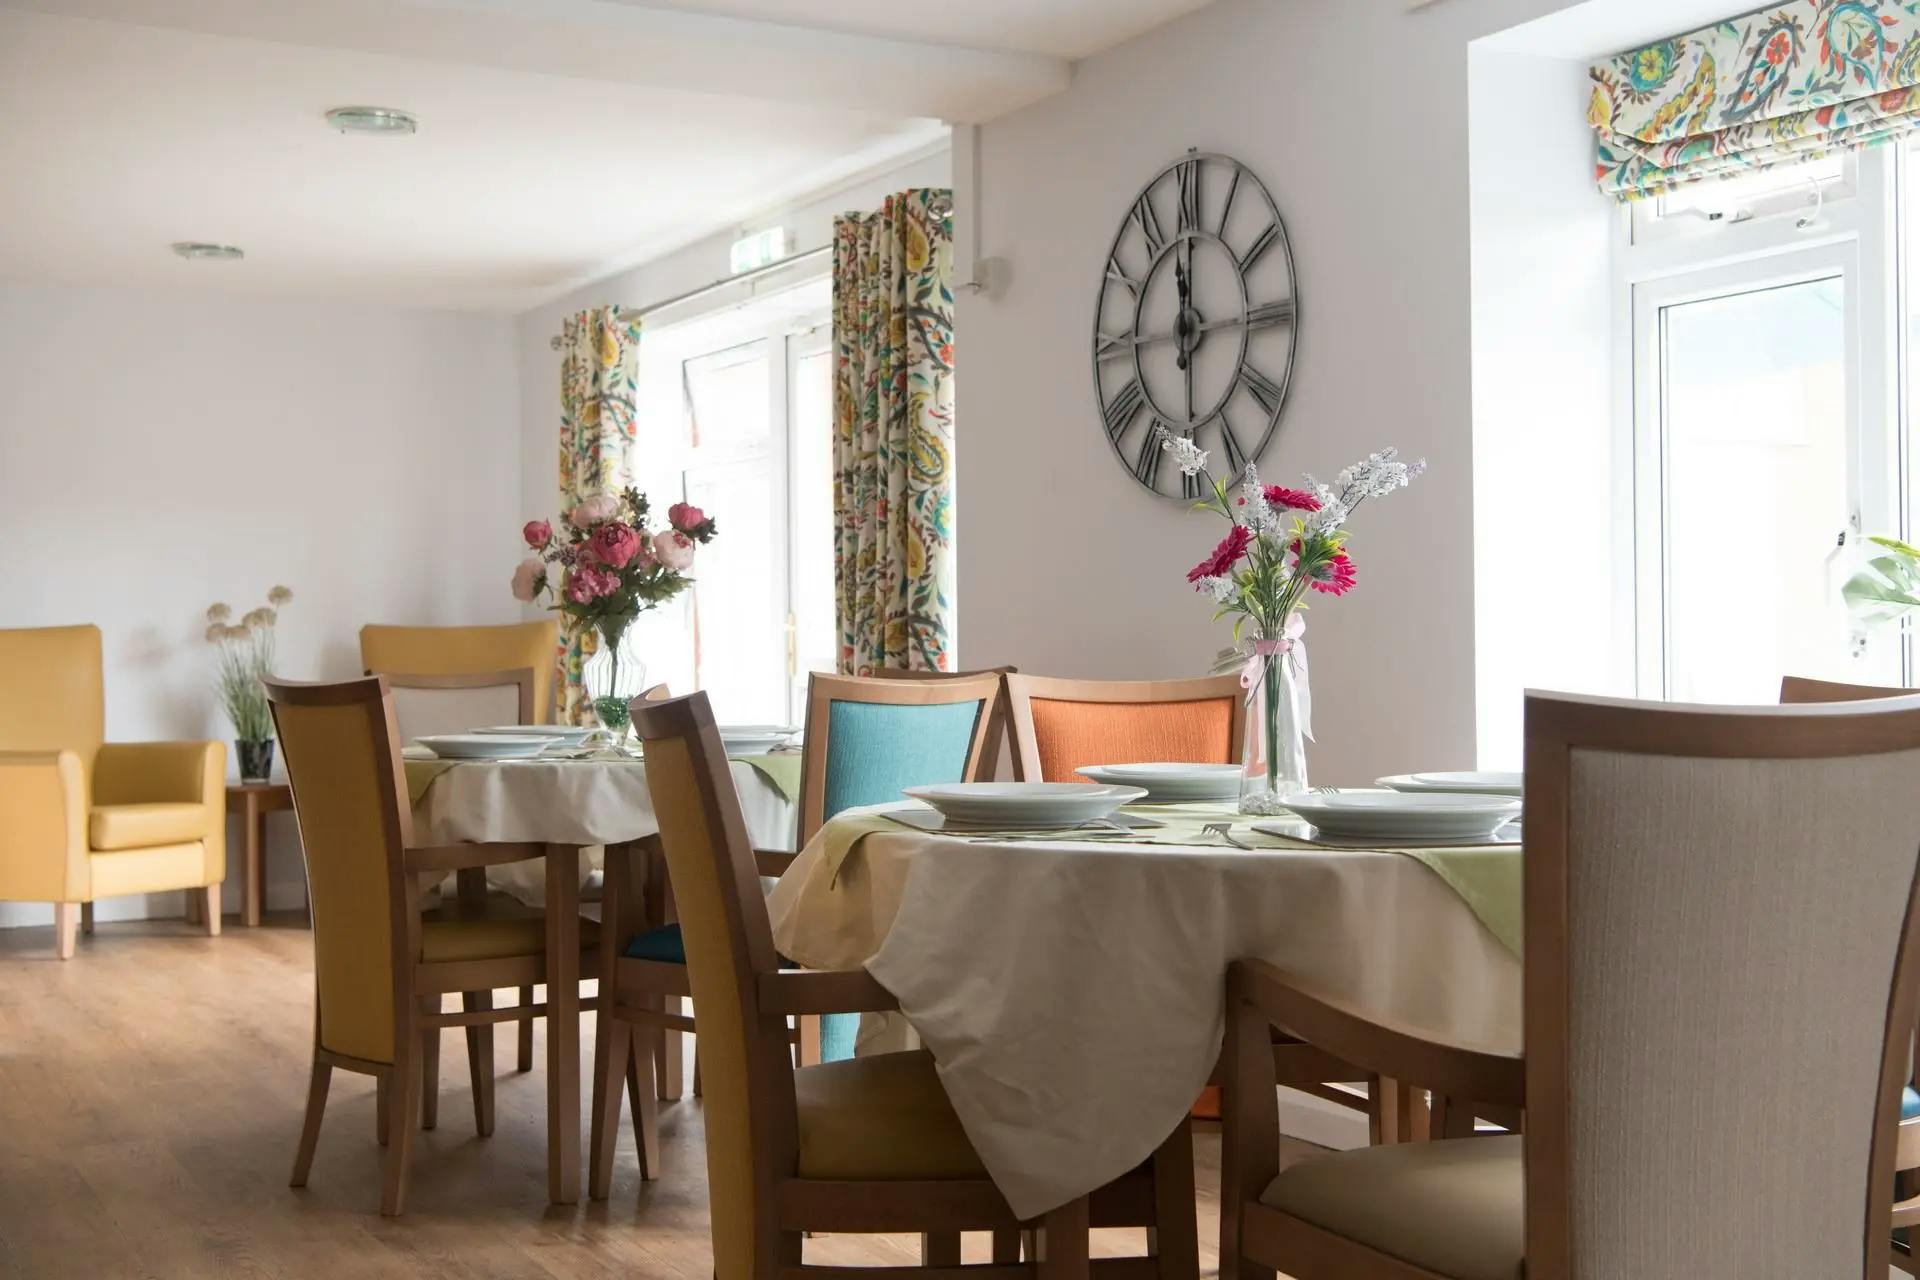 Dining Room at Gilawood Court Care Home in Nuneaton, Warwickshire